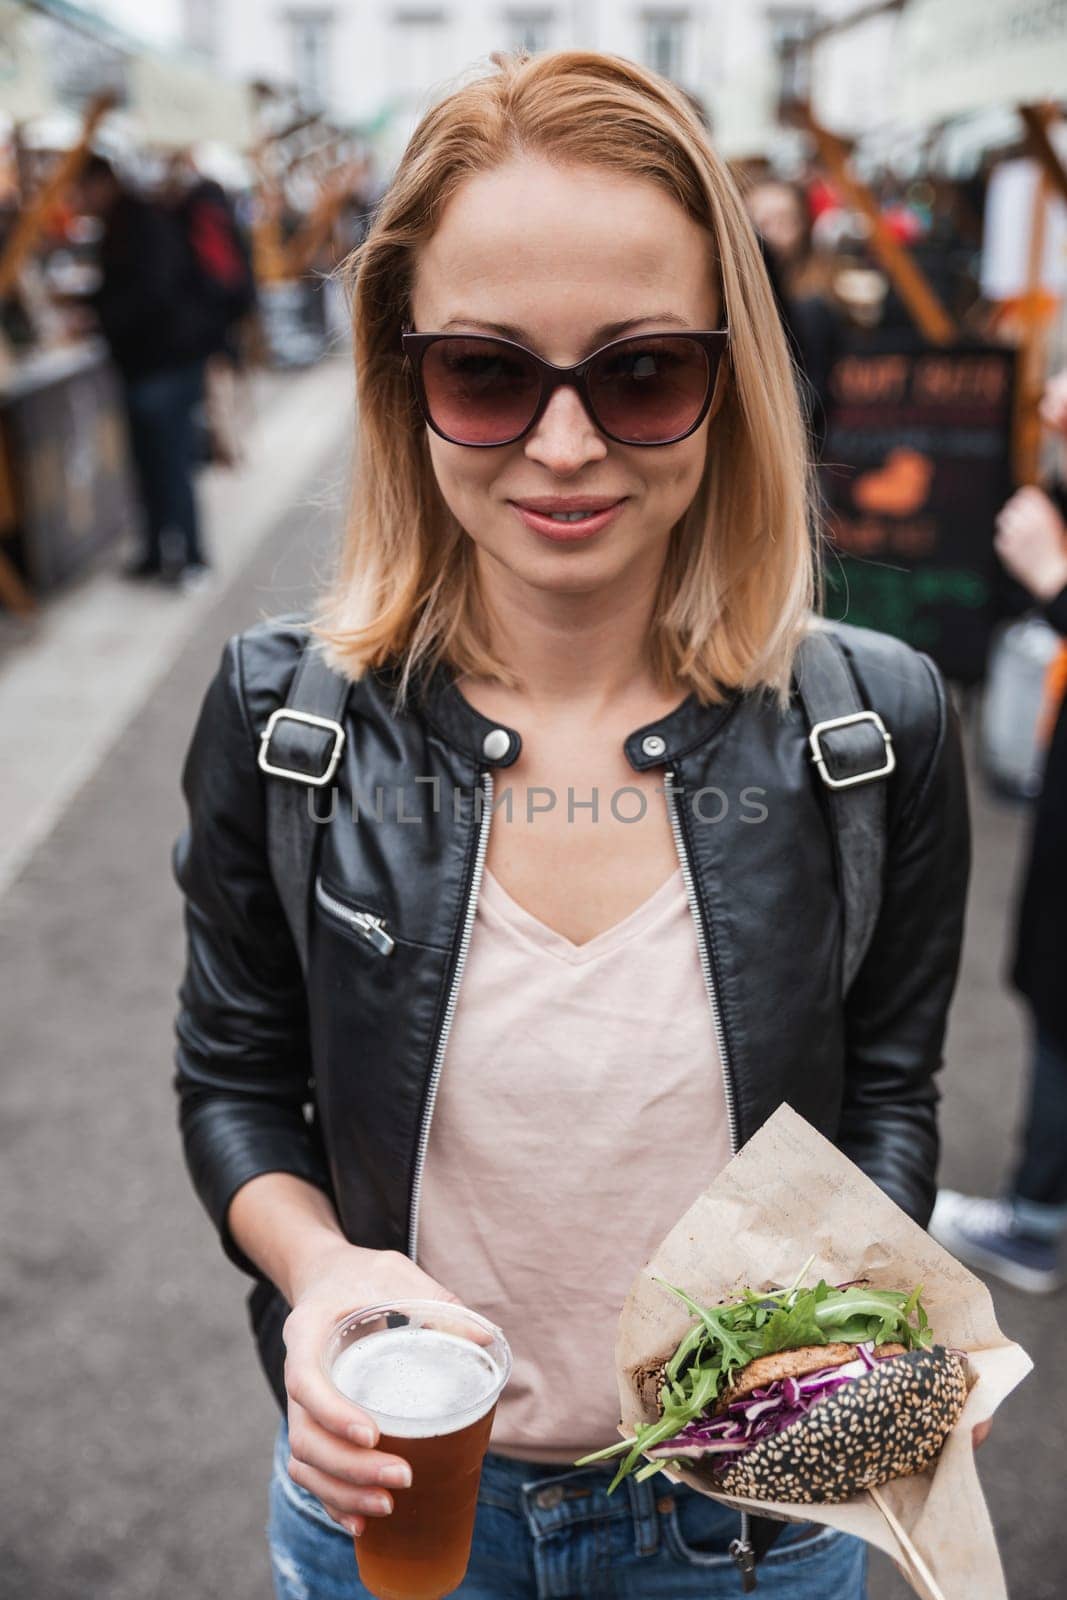 Beautiful young woman holding delicious organic salmon vegetarian burger and homebrewed IPA beer on open air beer an burger urban street food festival in Ljubljana, Slovenia